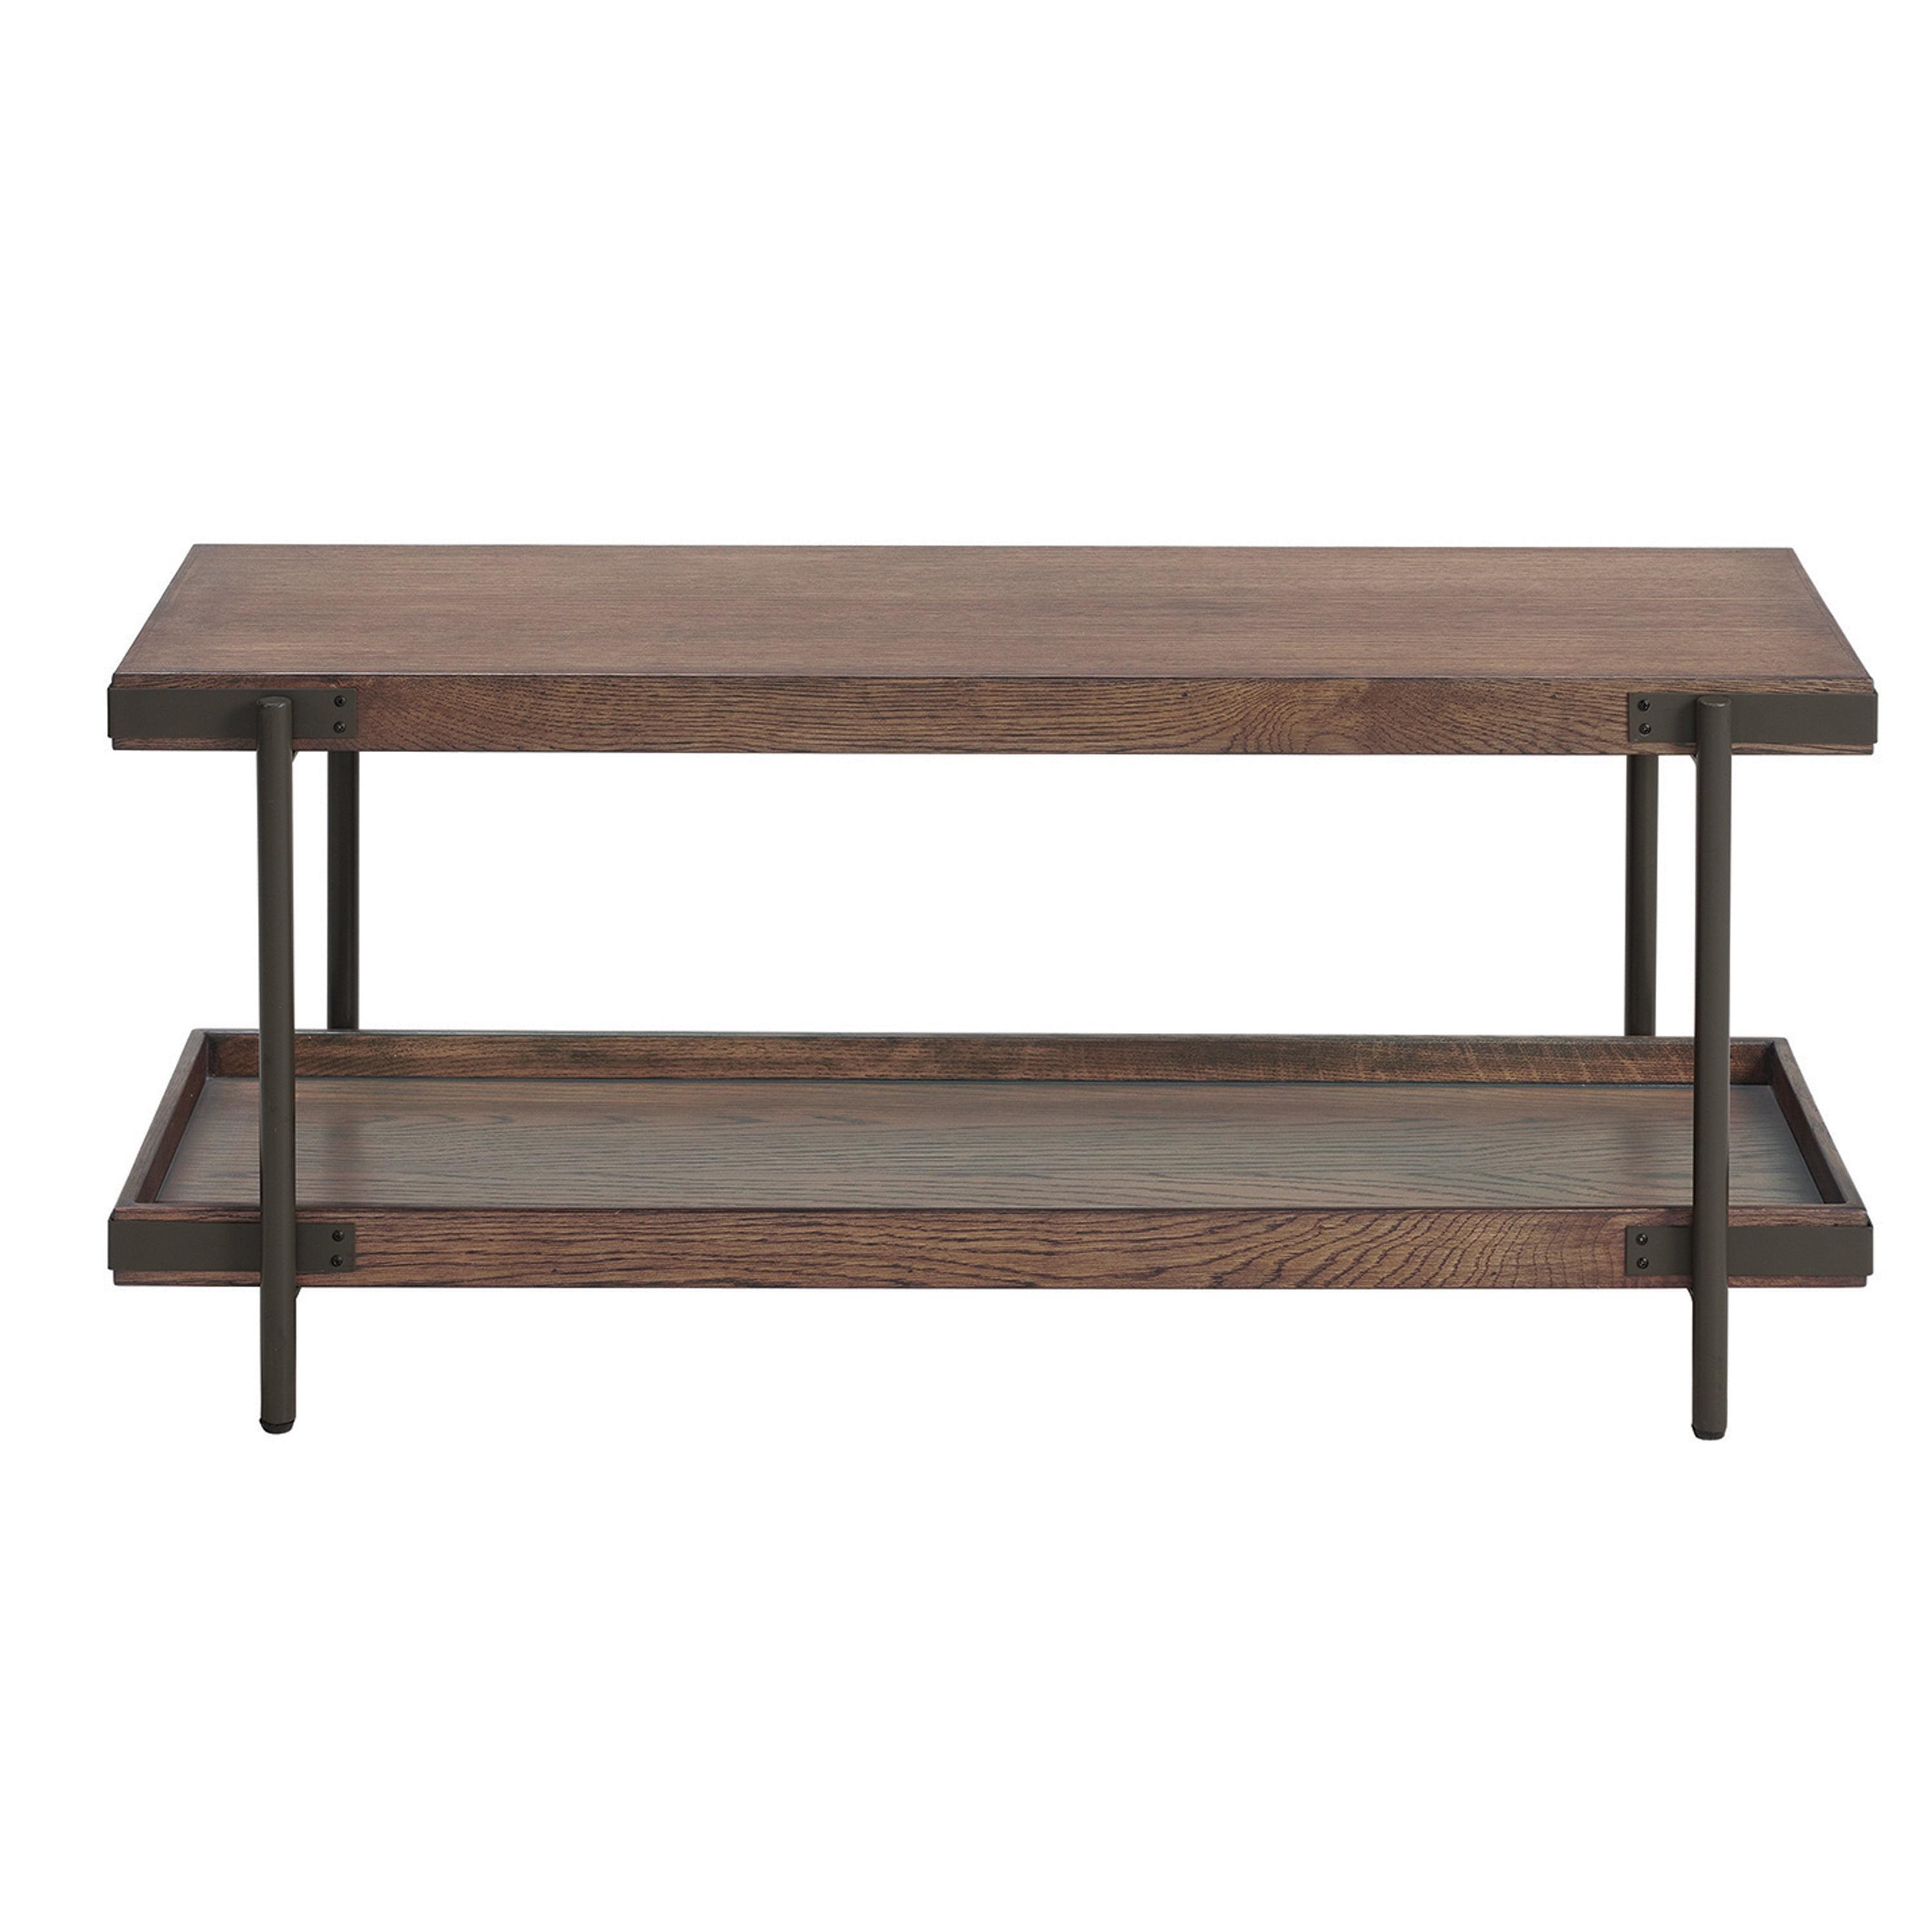 Kyra Rustic Oak and Metal 42" Bench with Shelf